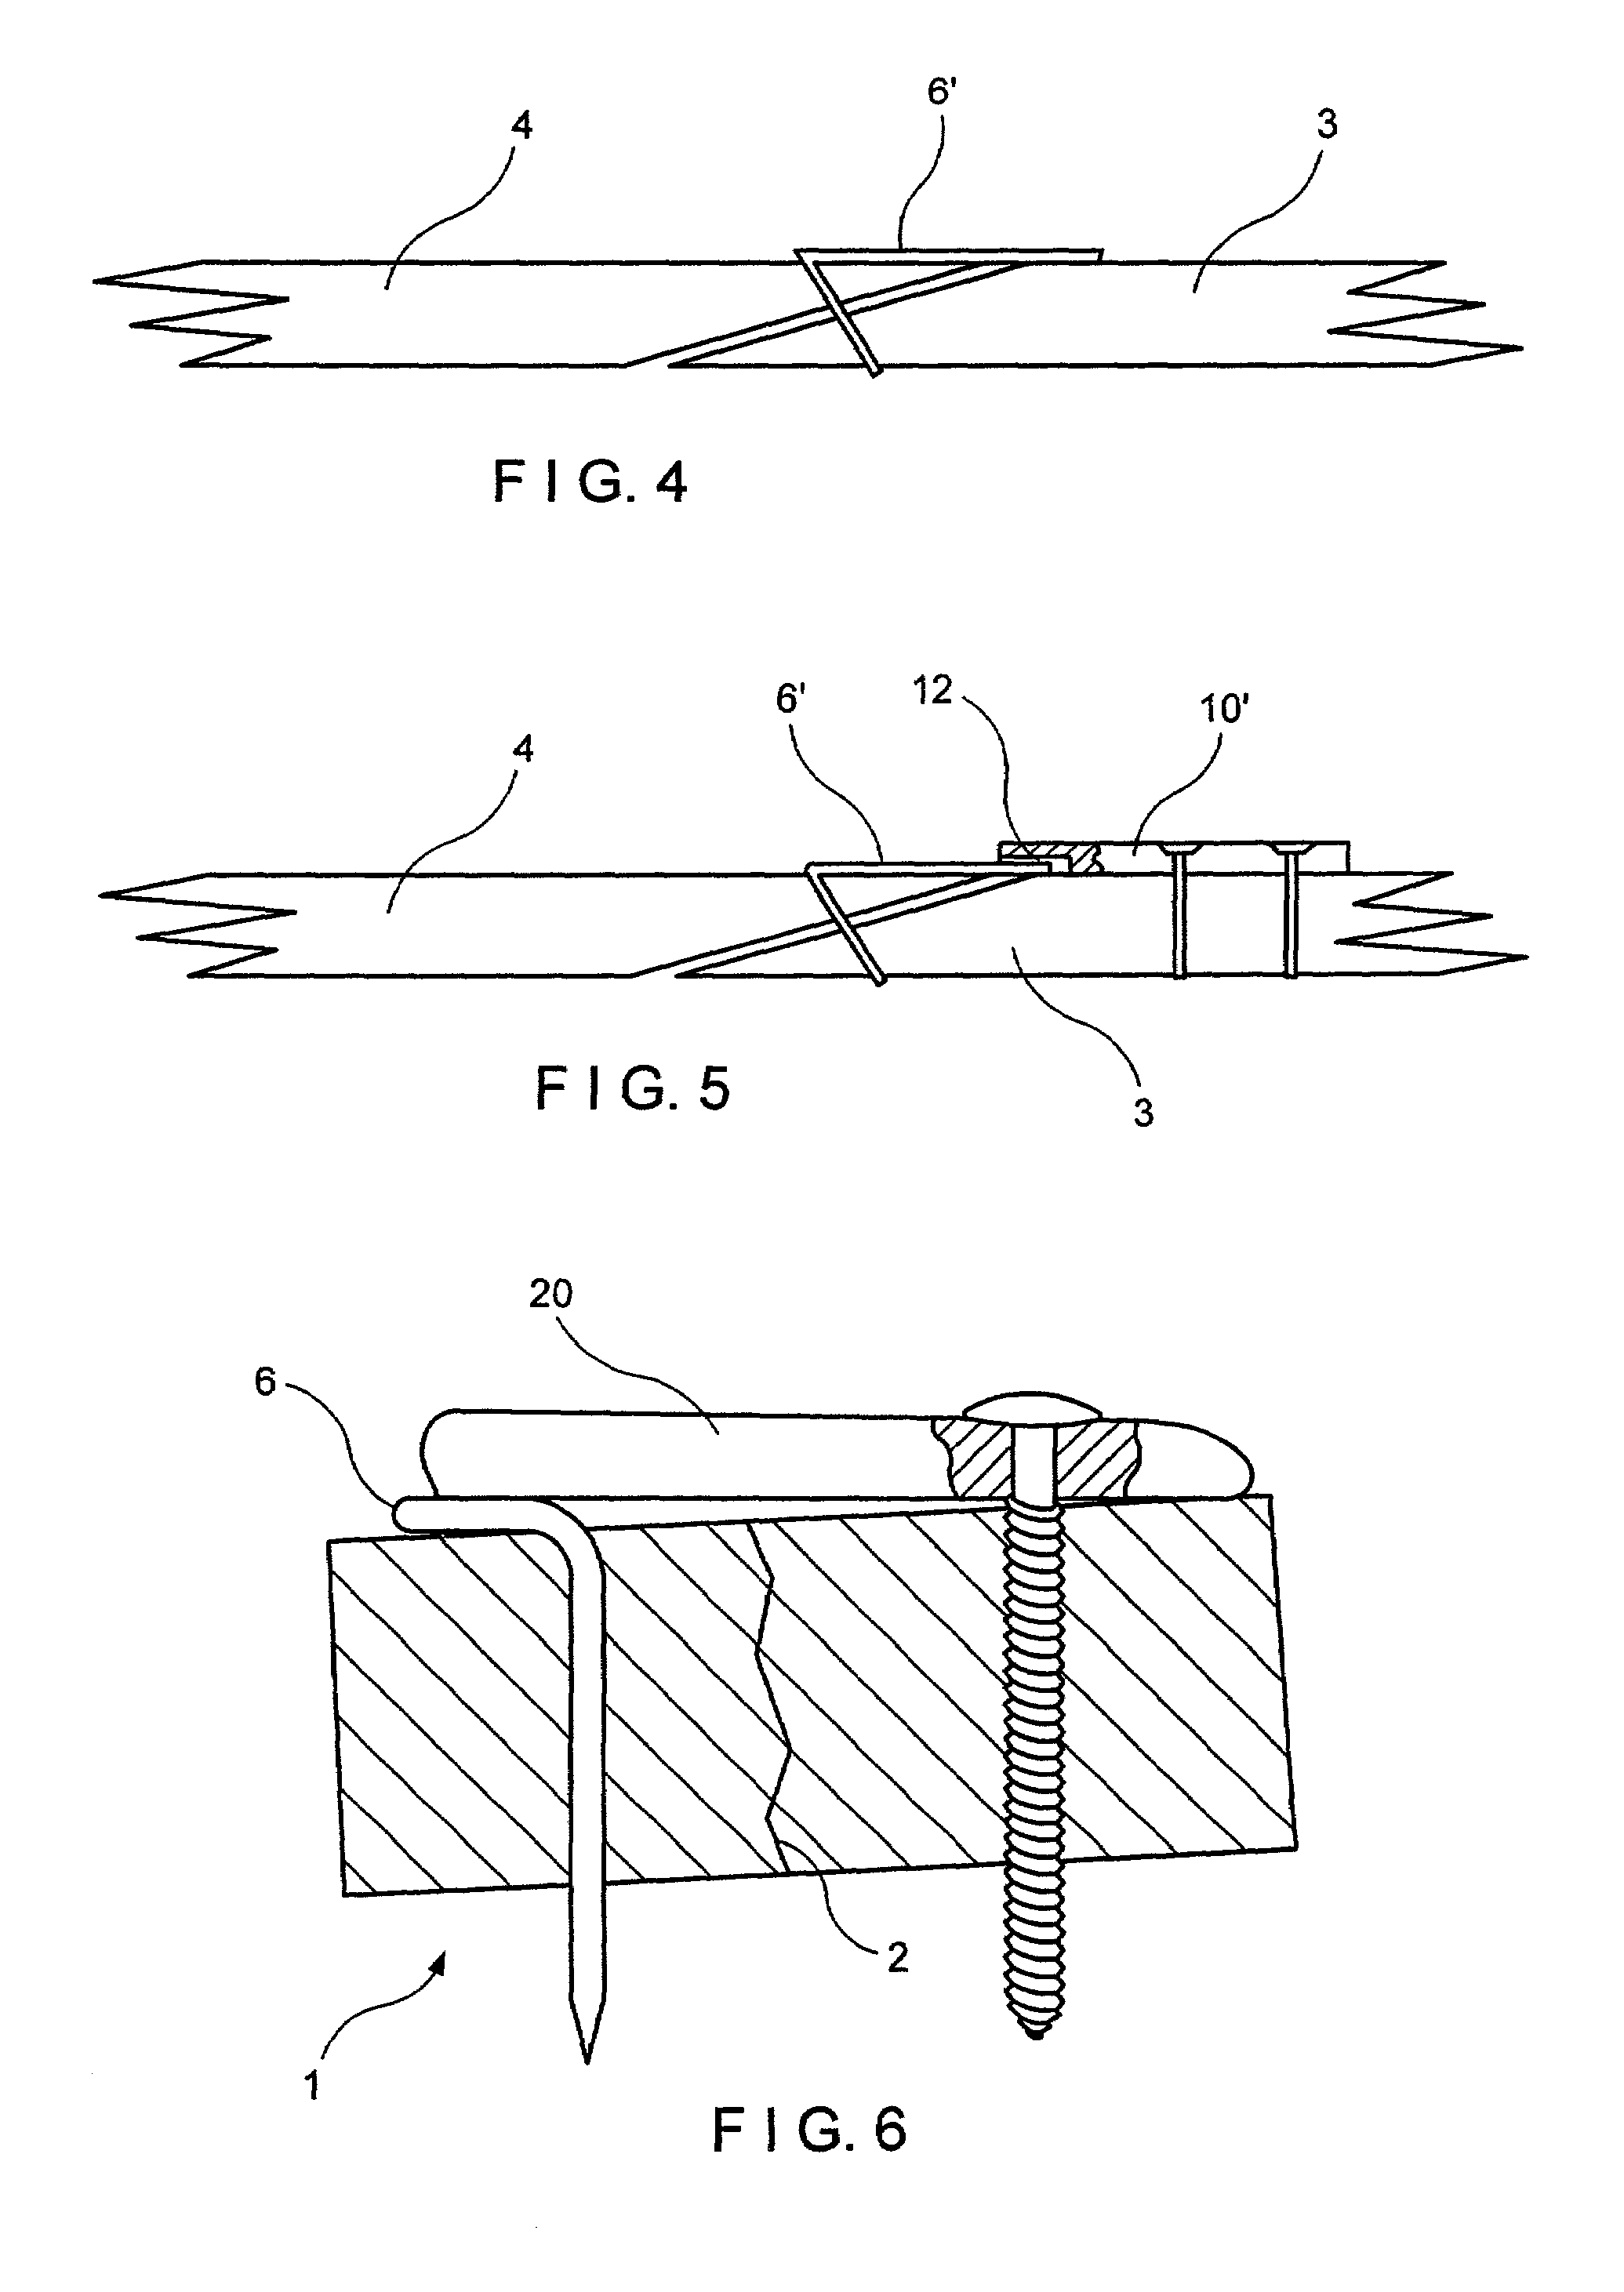 Fracture fixation device in which a fixation pin is axially restrained